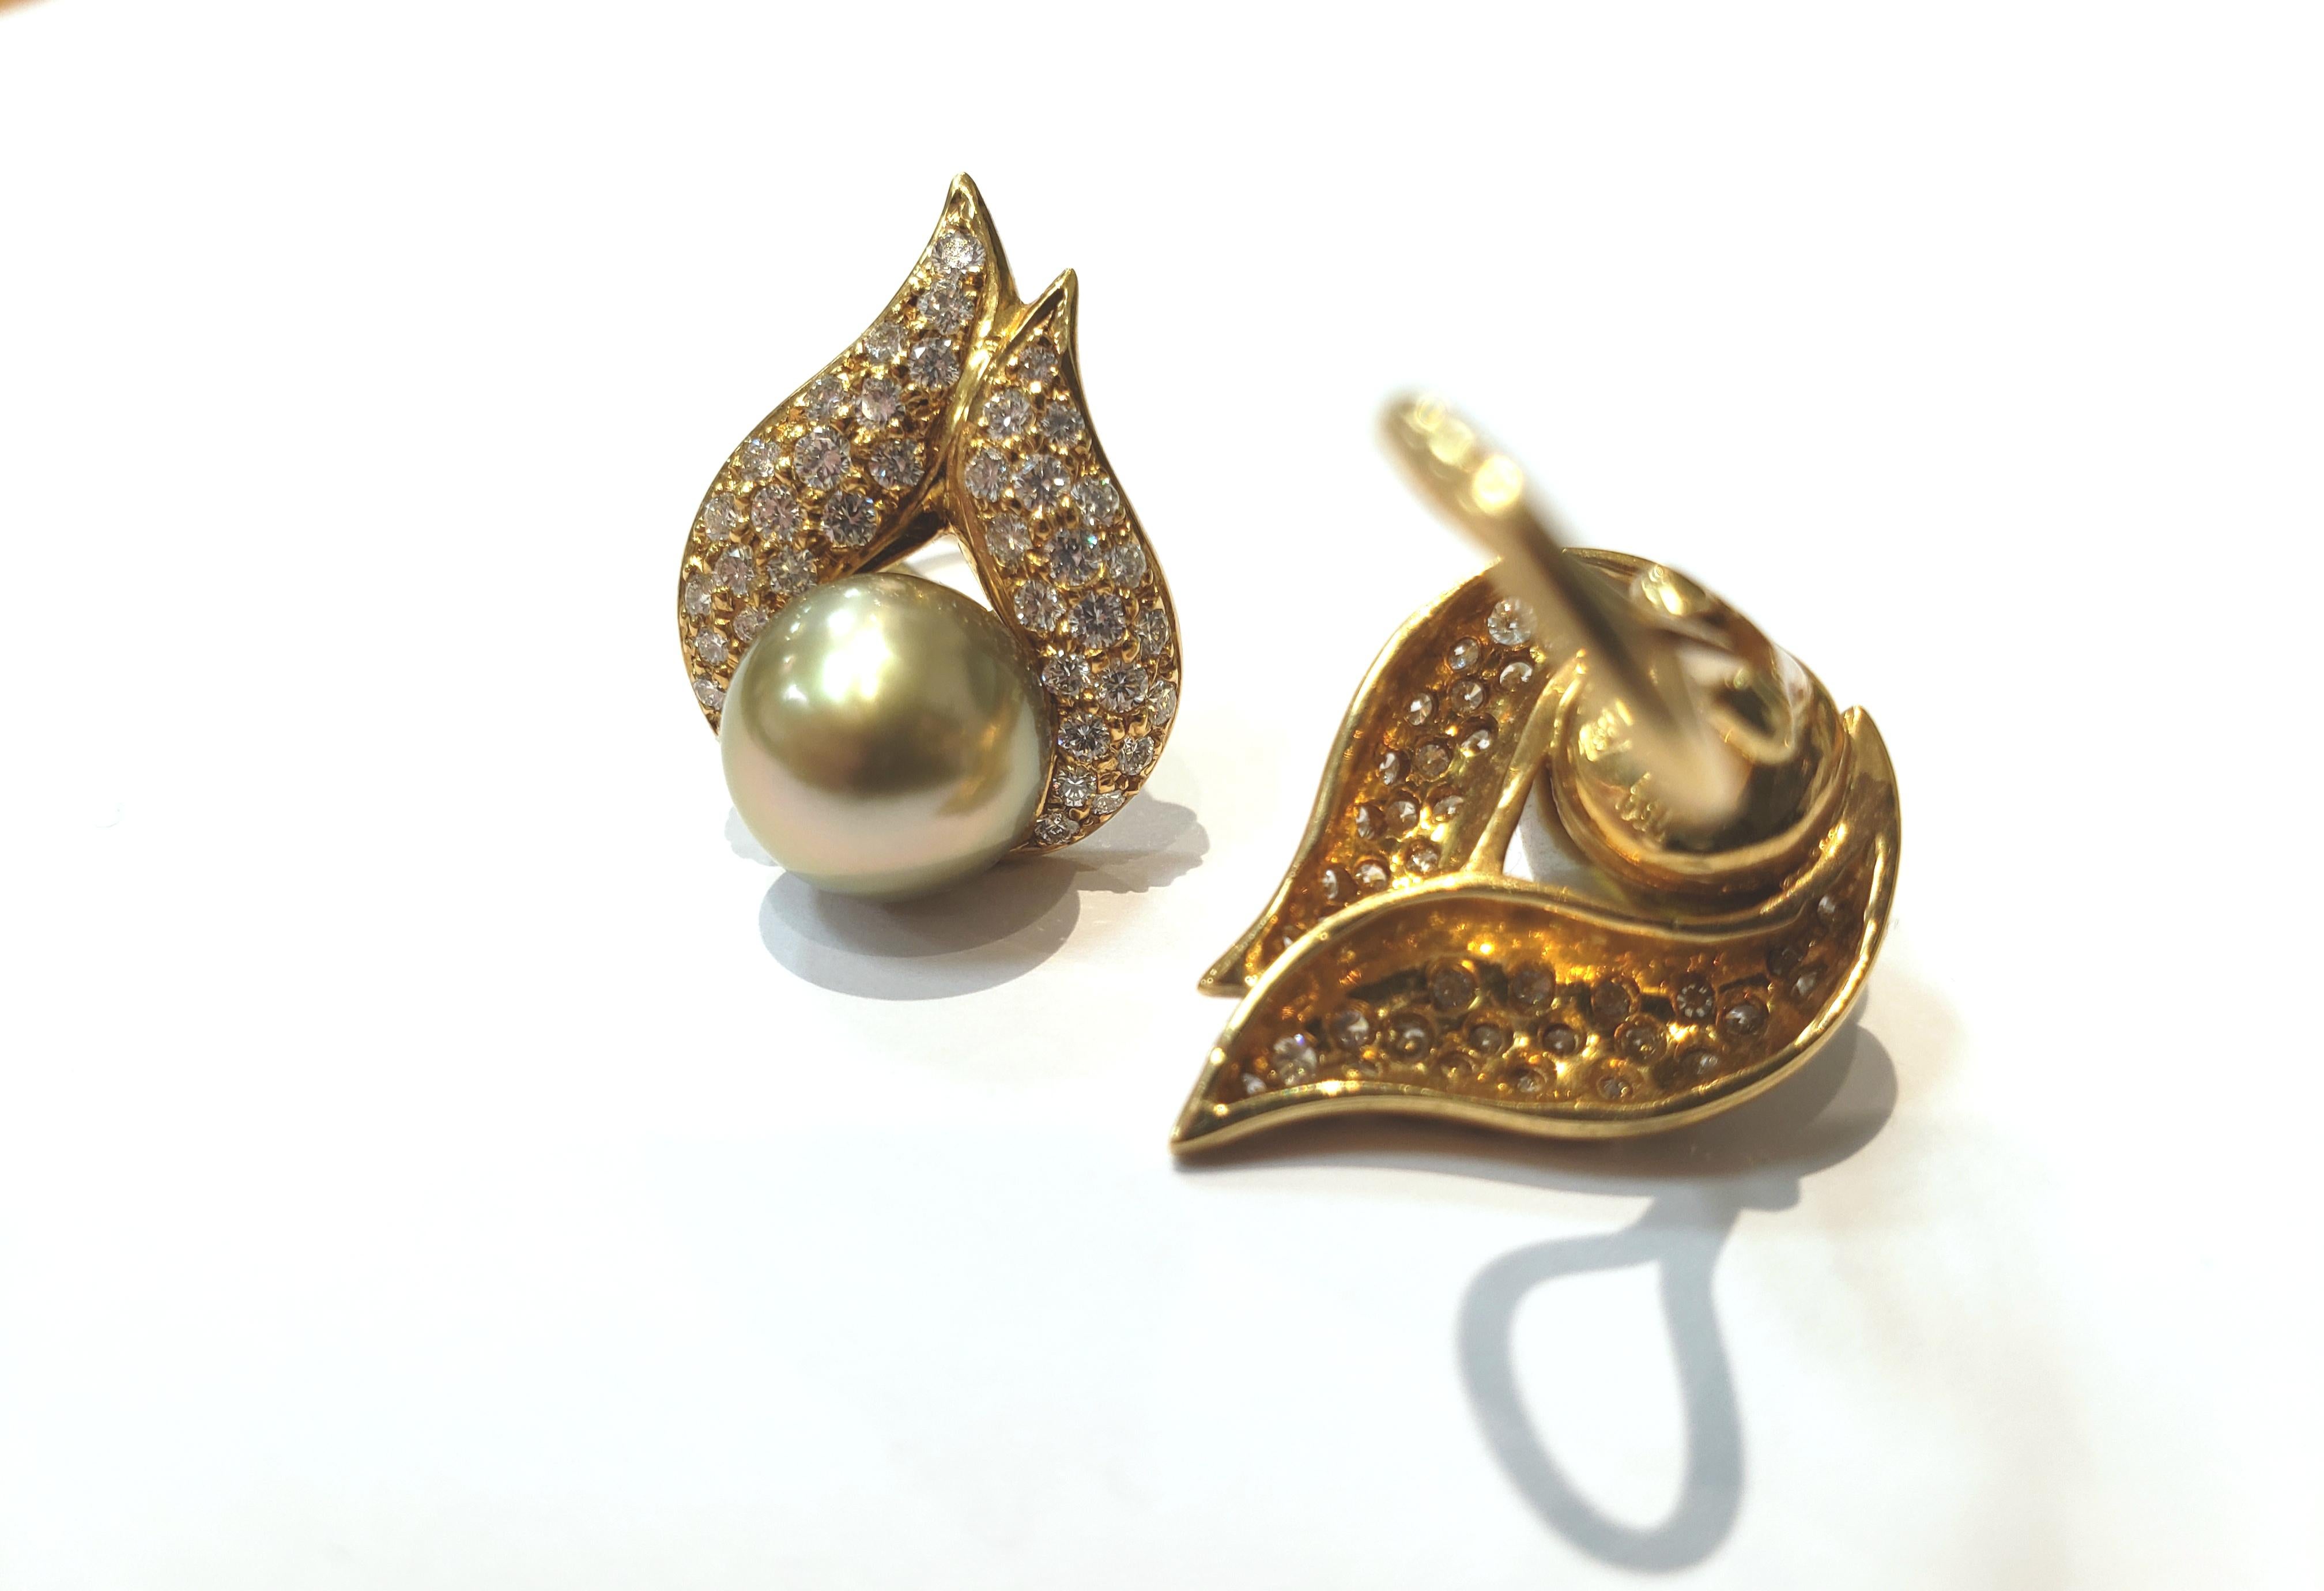 Round Cut 18 Karat Yellow Gold and Diamond Earrings with Pistachio Pearls by Gumuchian For Sale